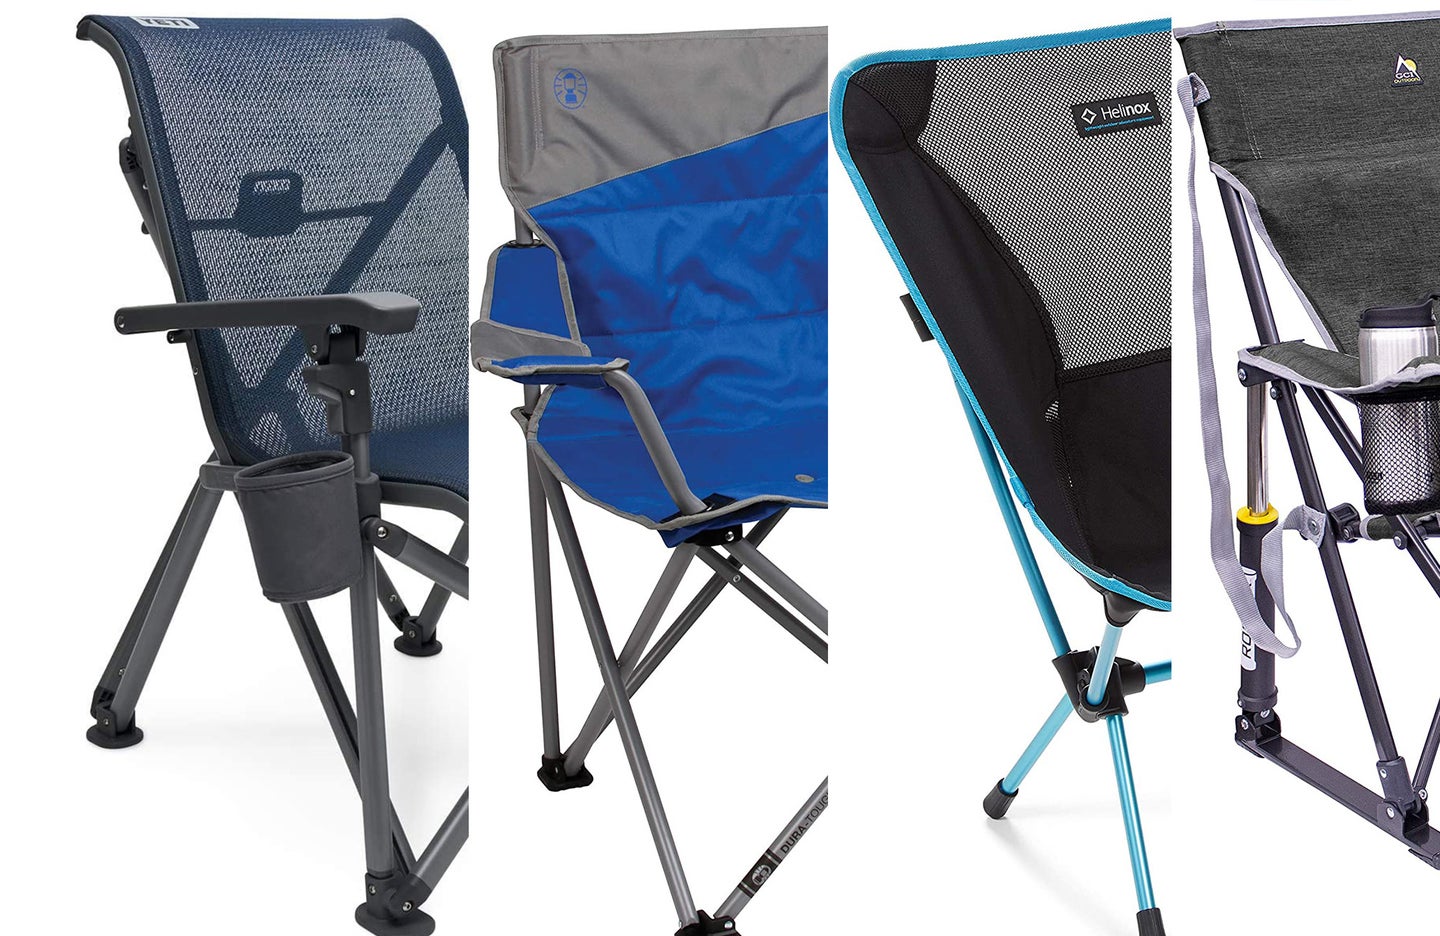 Take a breather in the outdoors with one of the best camping chairs.